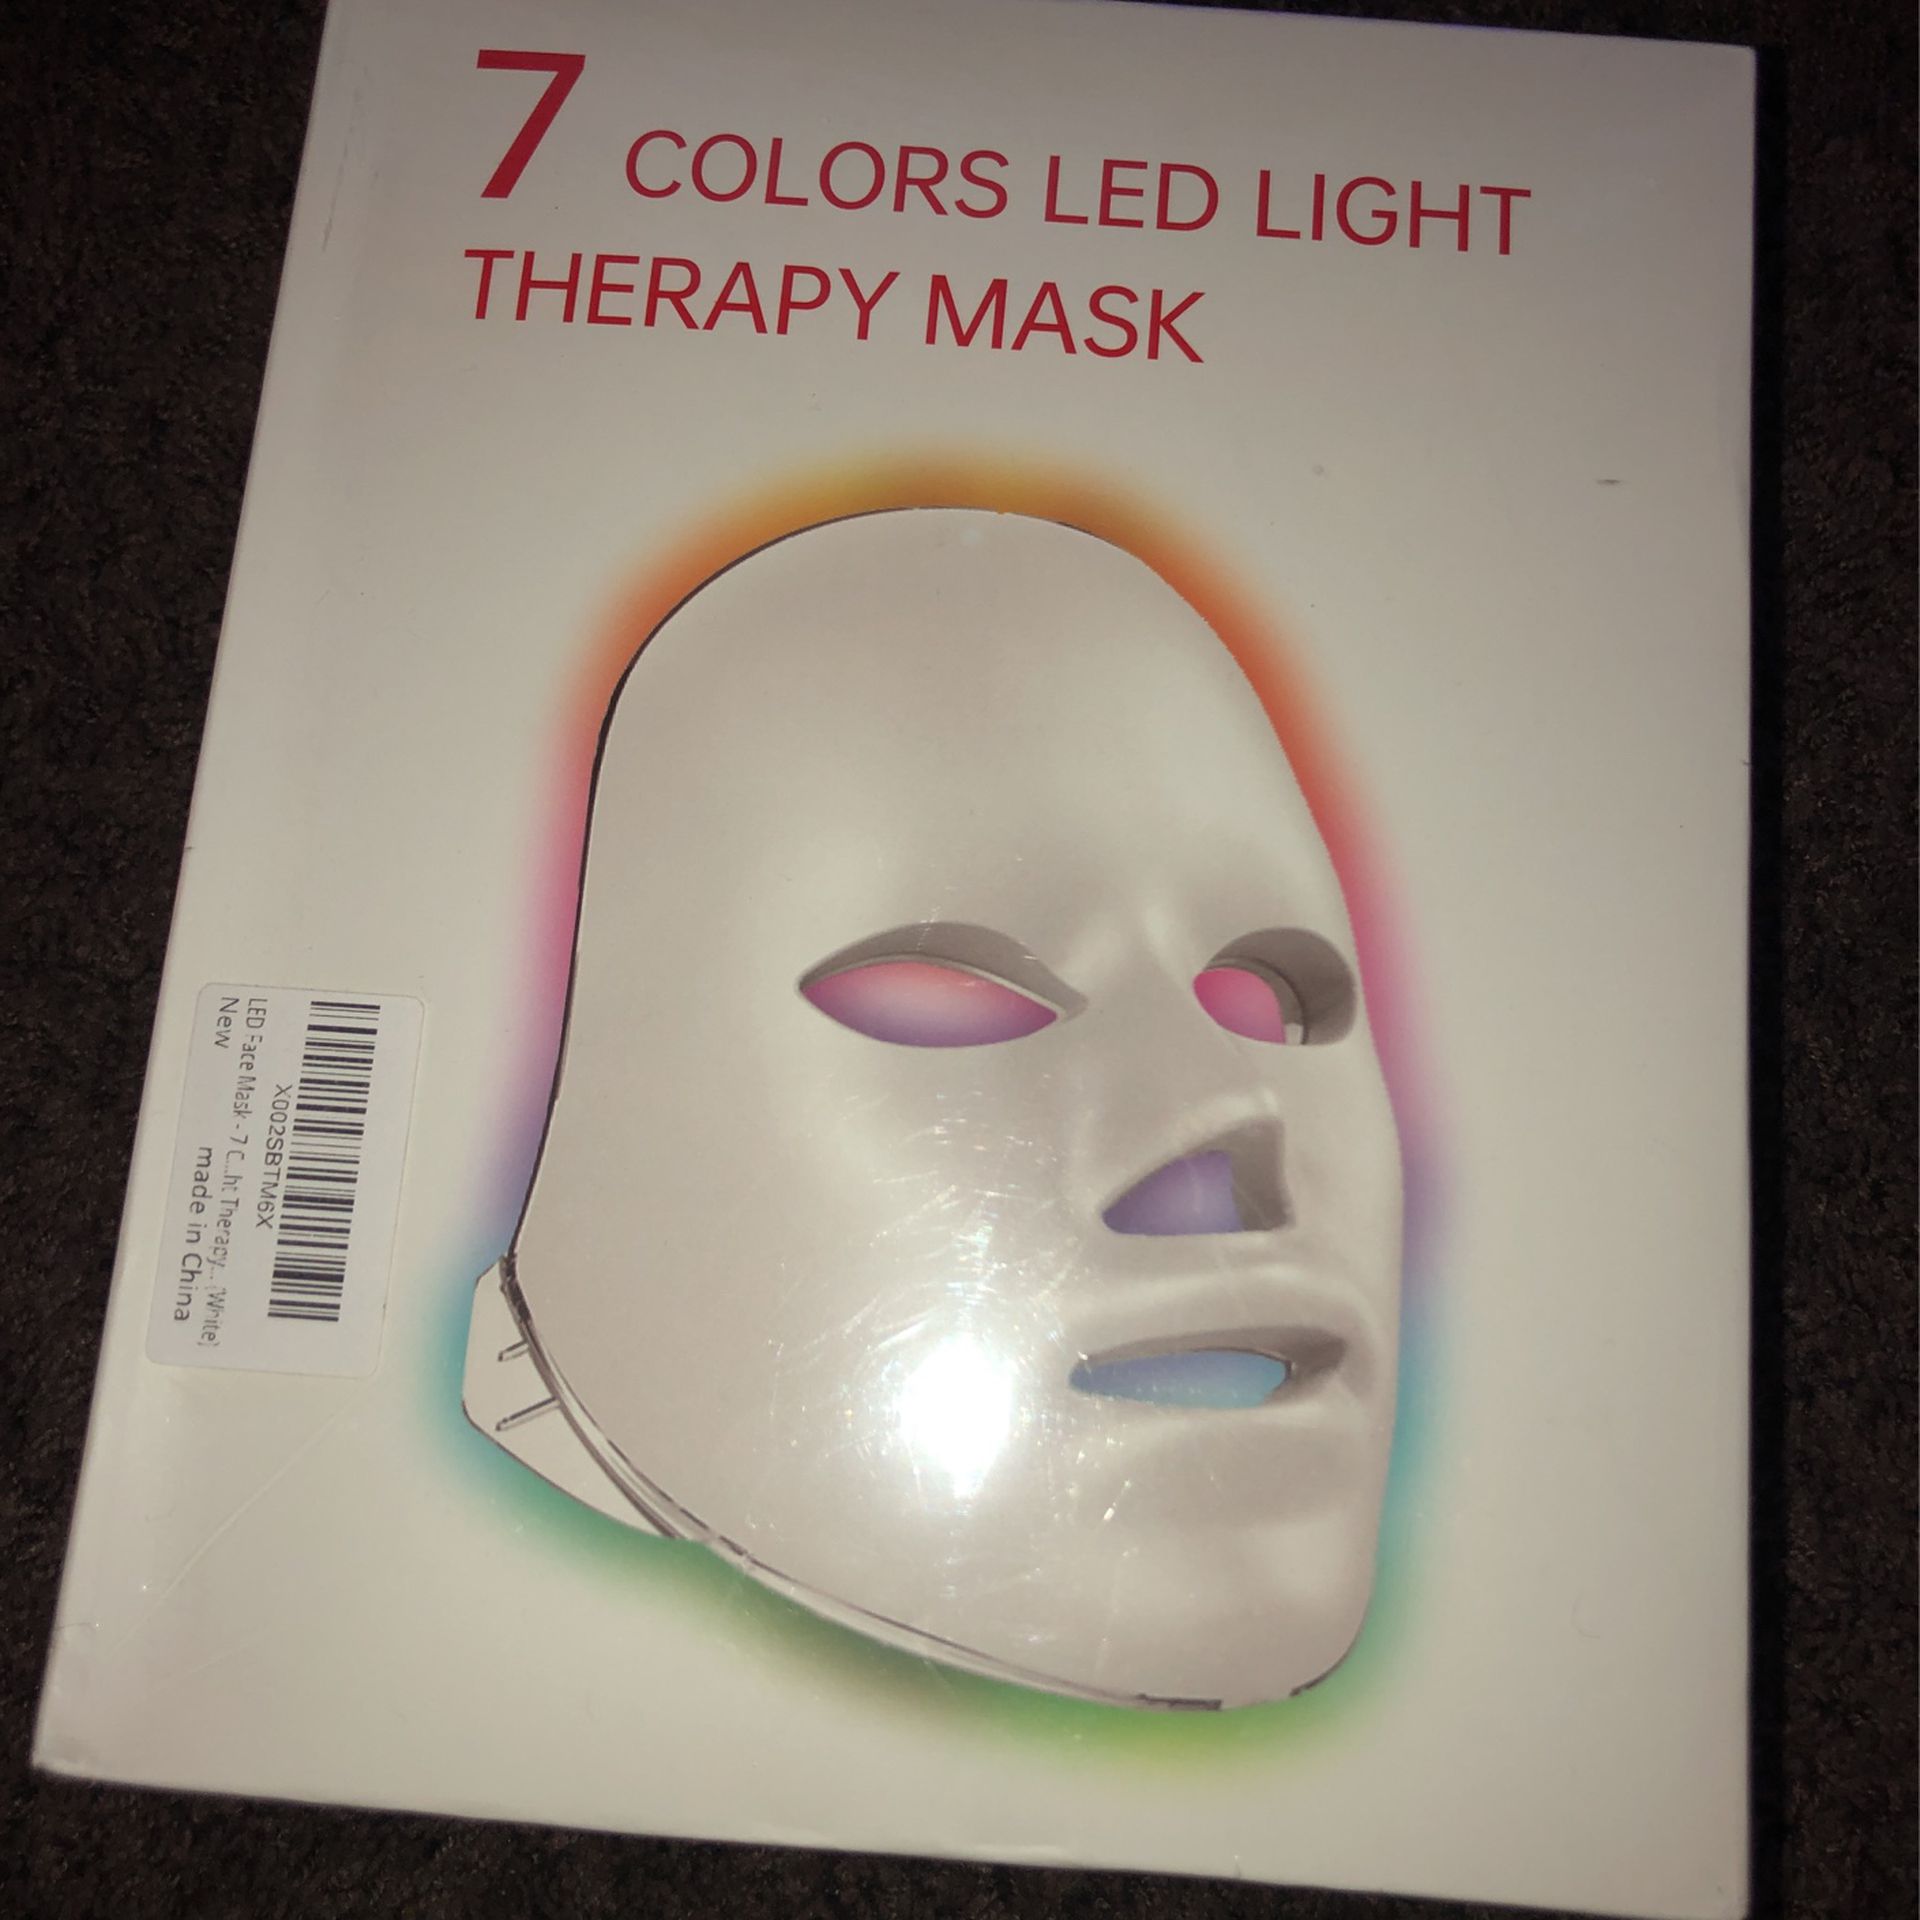 Led Face Mask Light Therapy, NEWKEY 7 Led Light Therapy Facial Skin Care Mask Brand New 